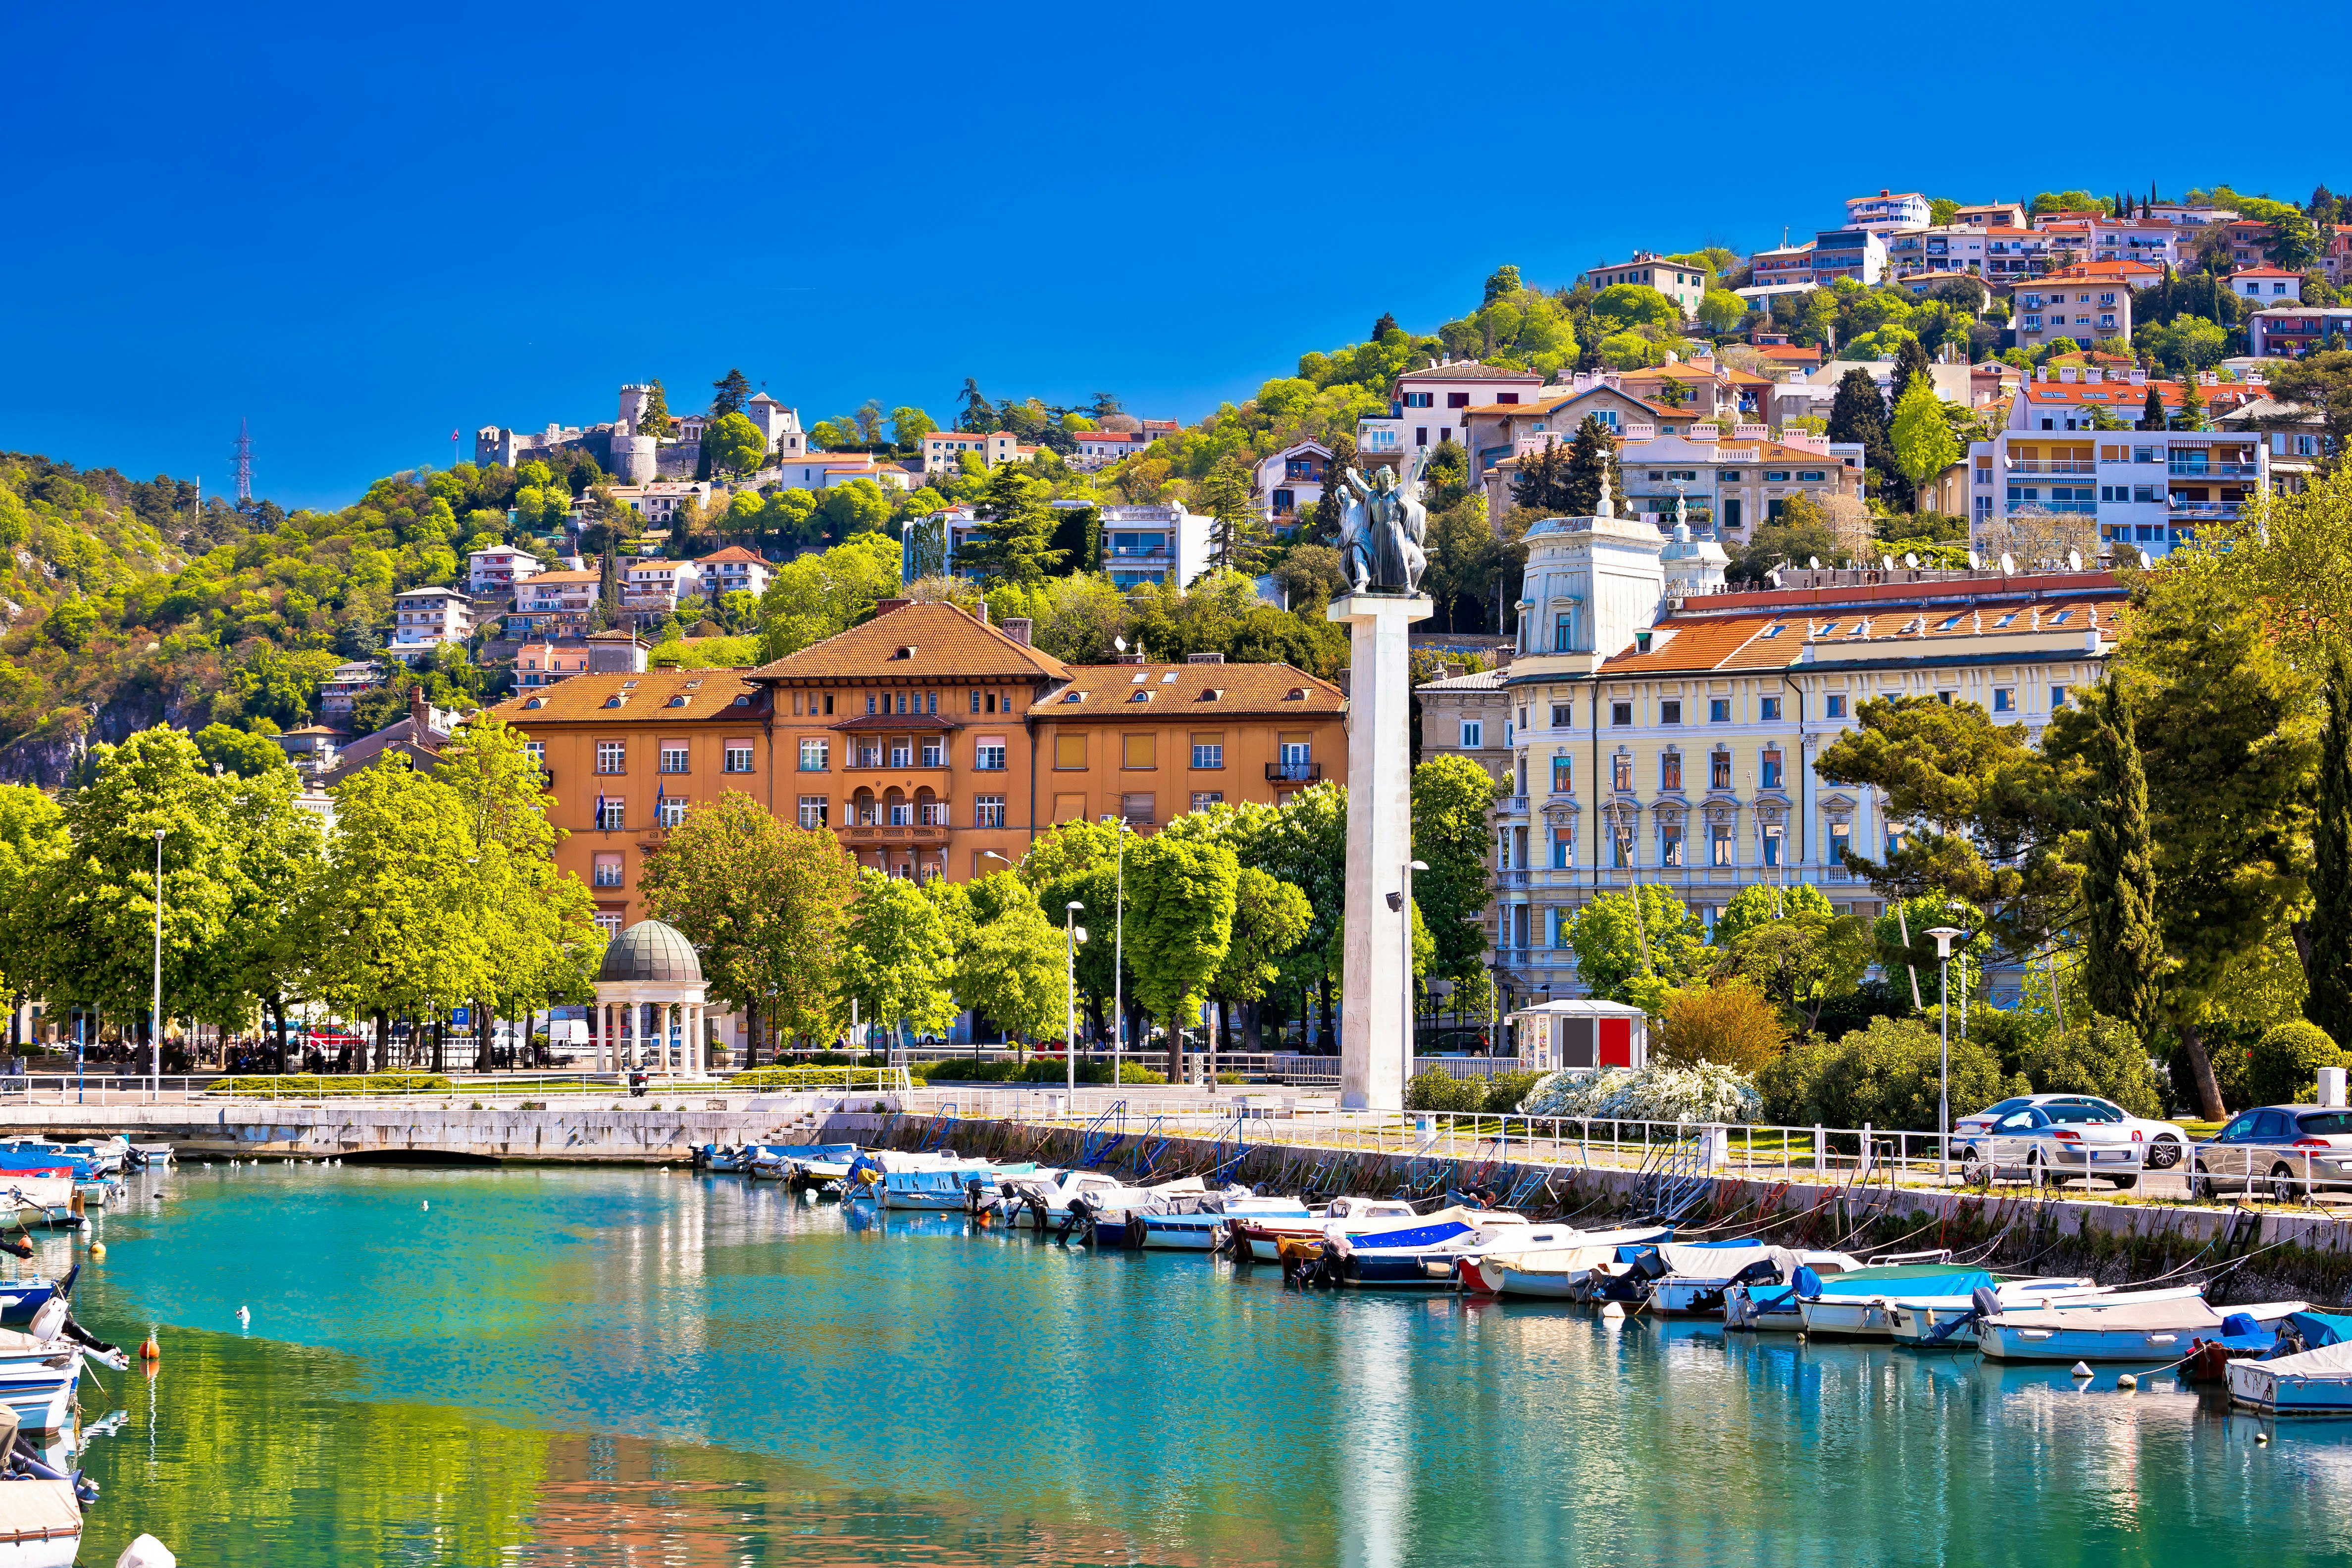 Historic Rijeka sits on a hill lined by a waterfront in the Kvarner Gulf.